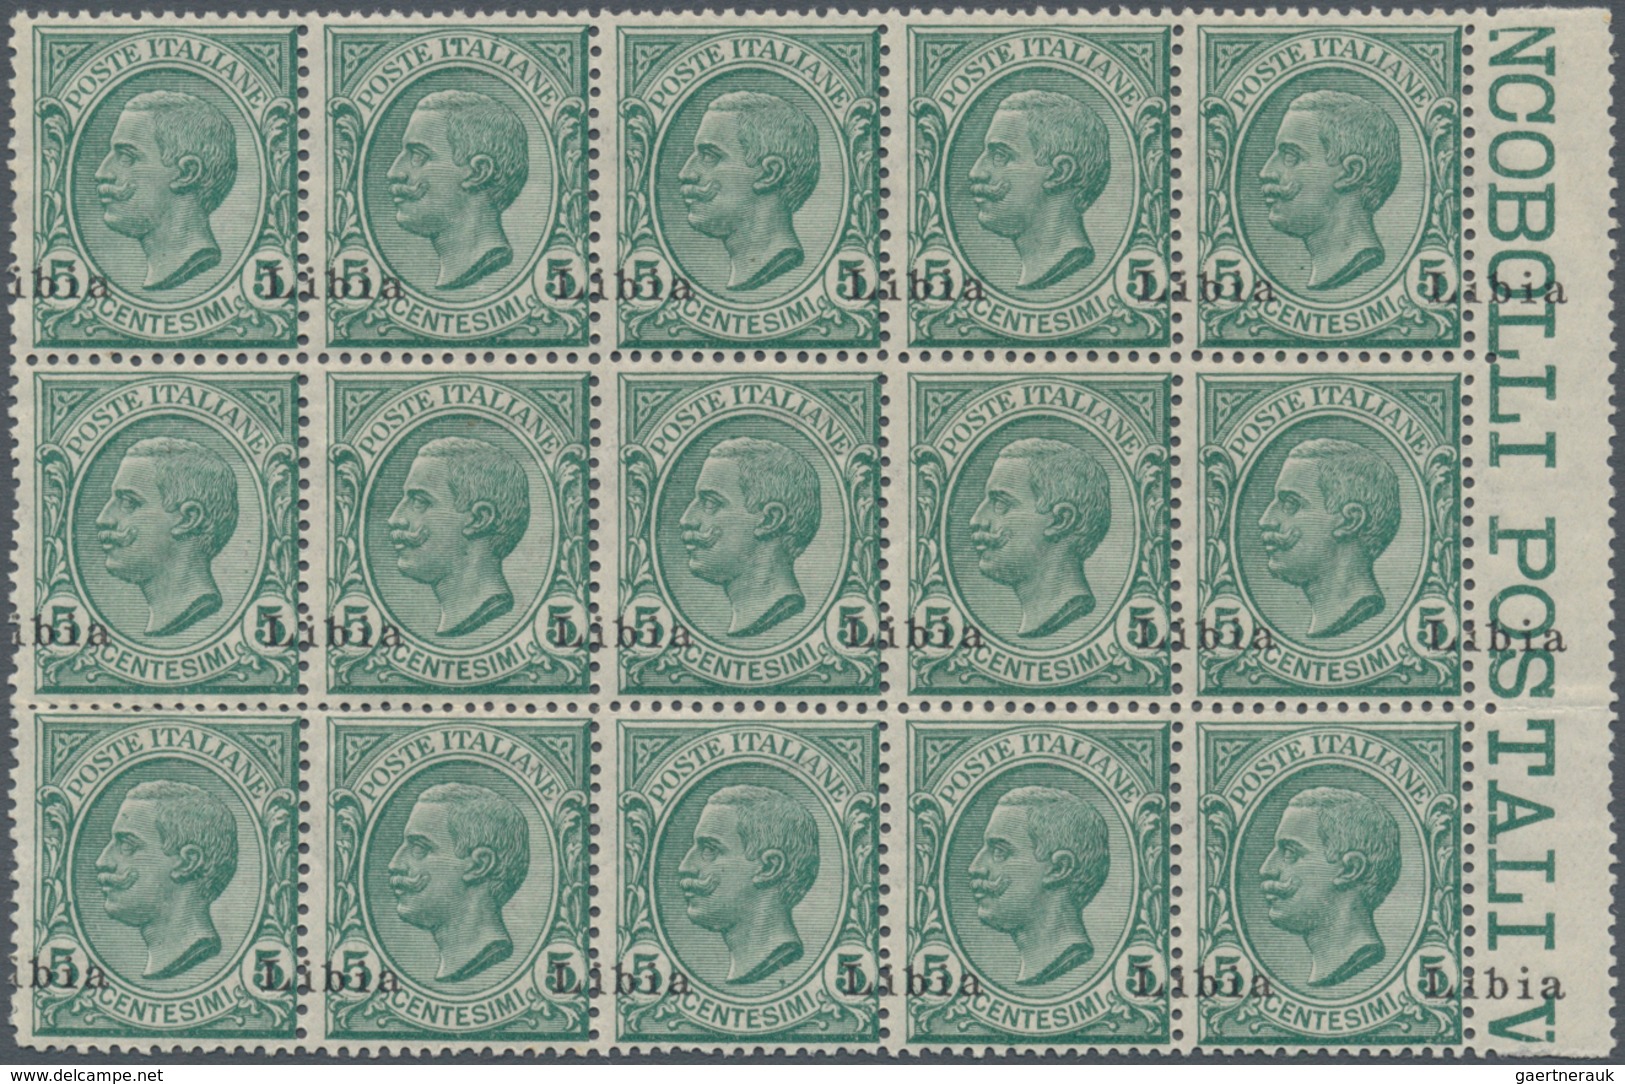 01059 Italienisch-Libyen: 1912/1915: 5 Green Cents With Overprint "Libia" Heavy Shifted To The Top And Rig - Libia